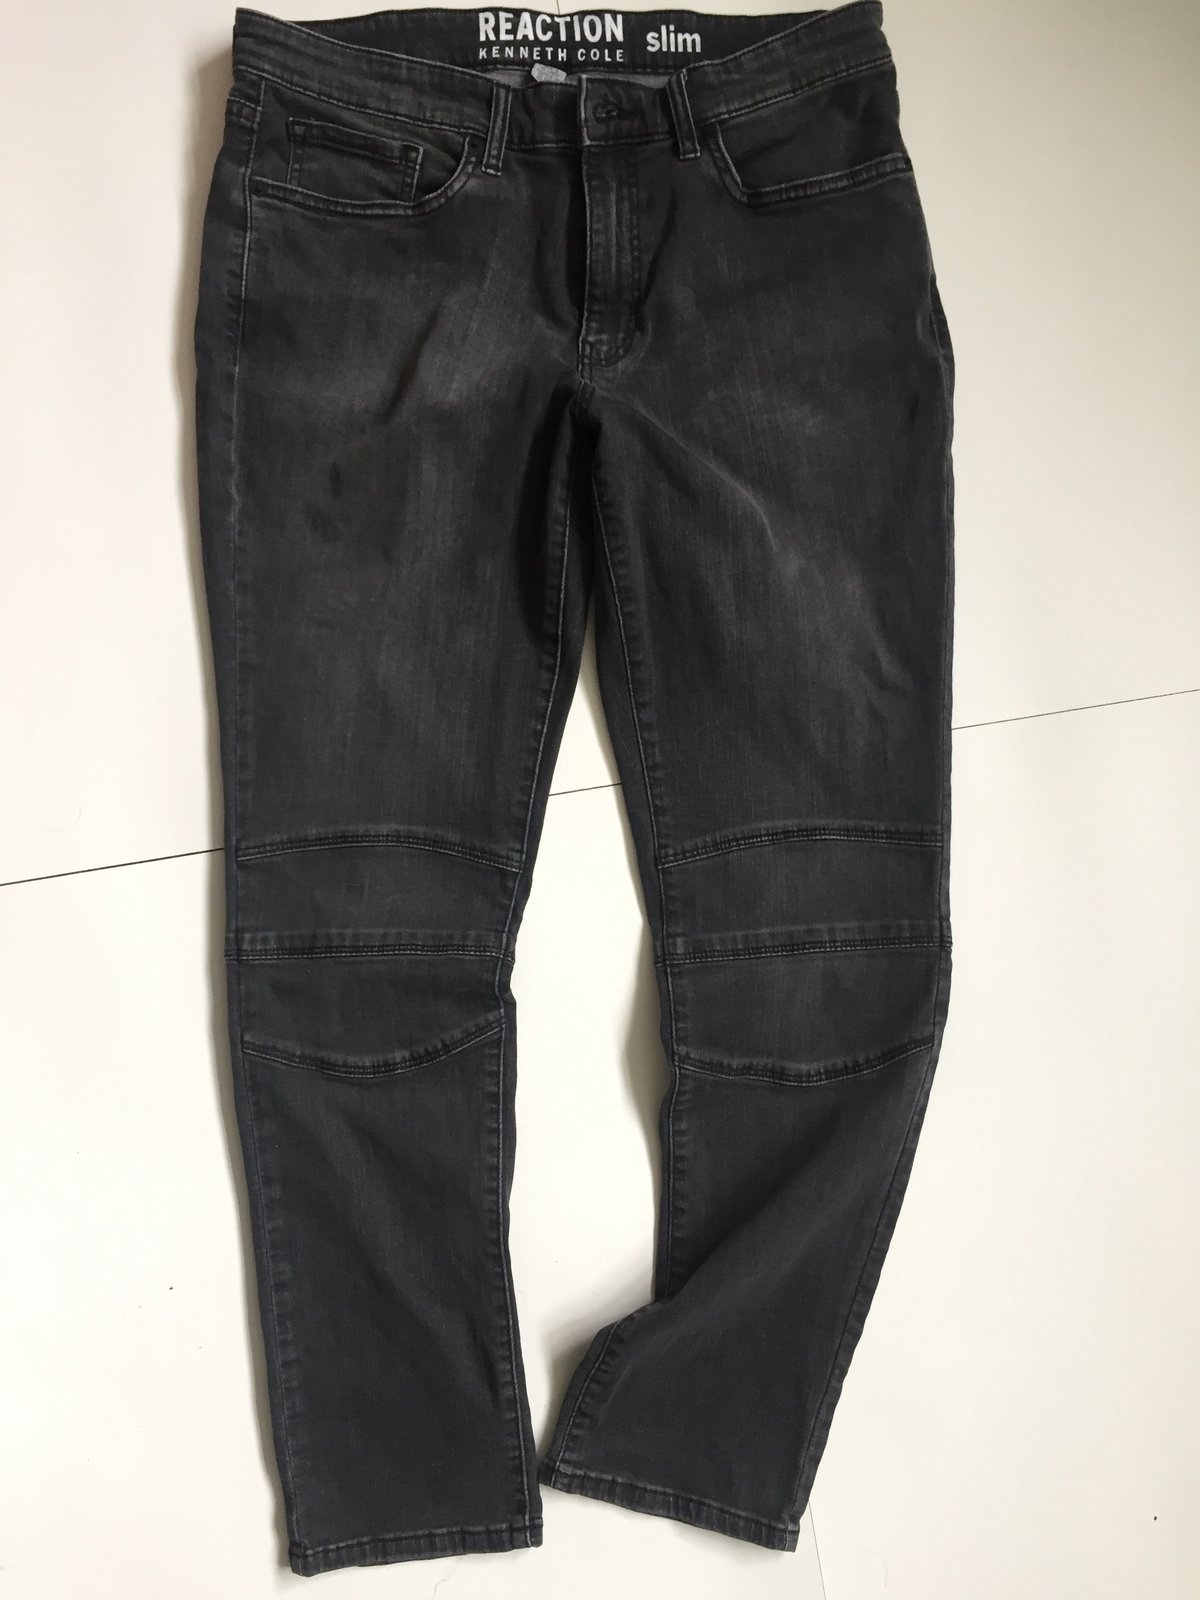 reaction kenneth cole jeans